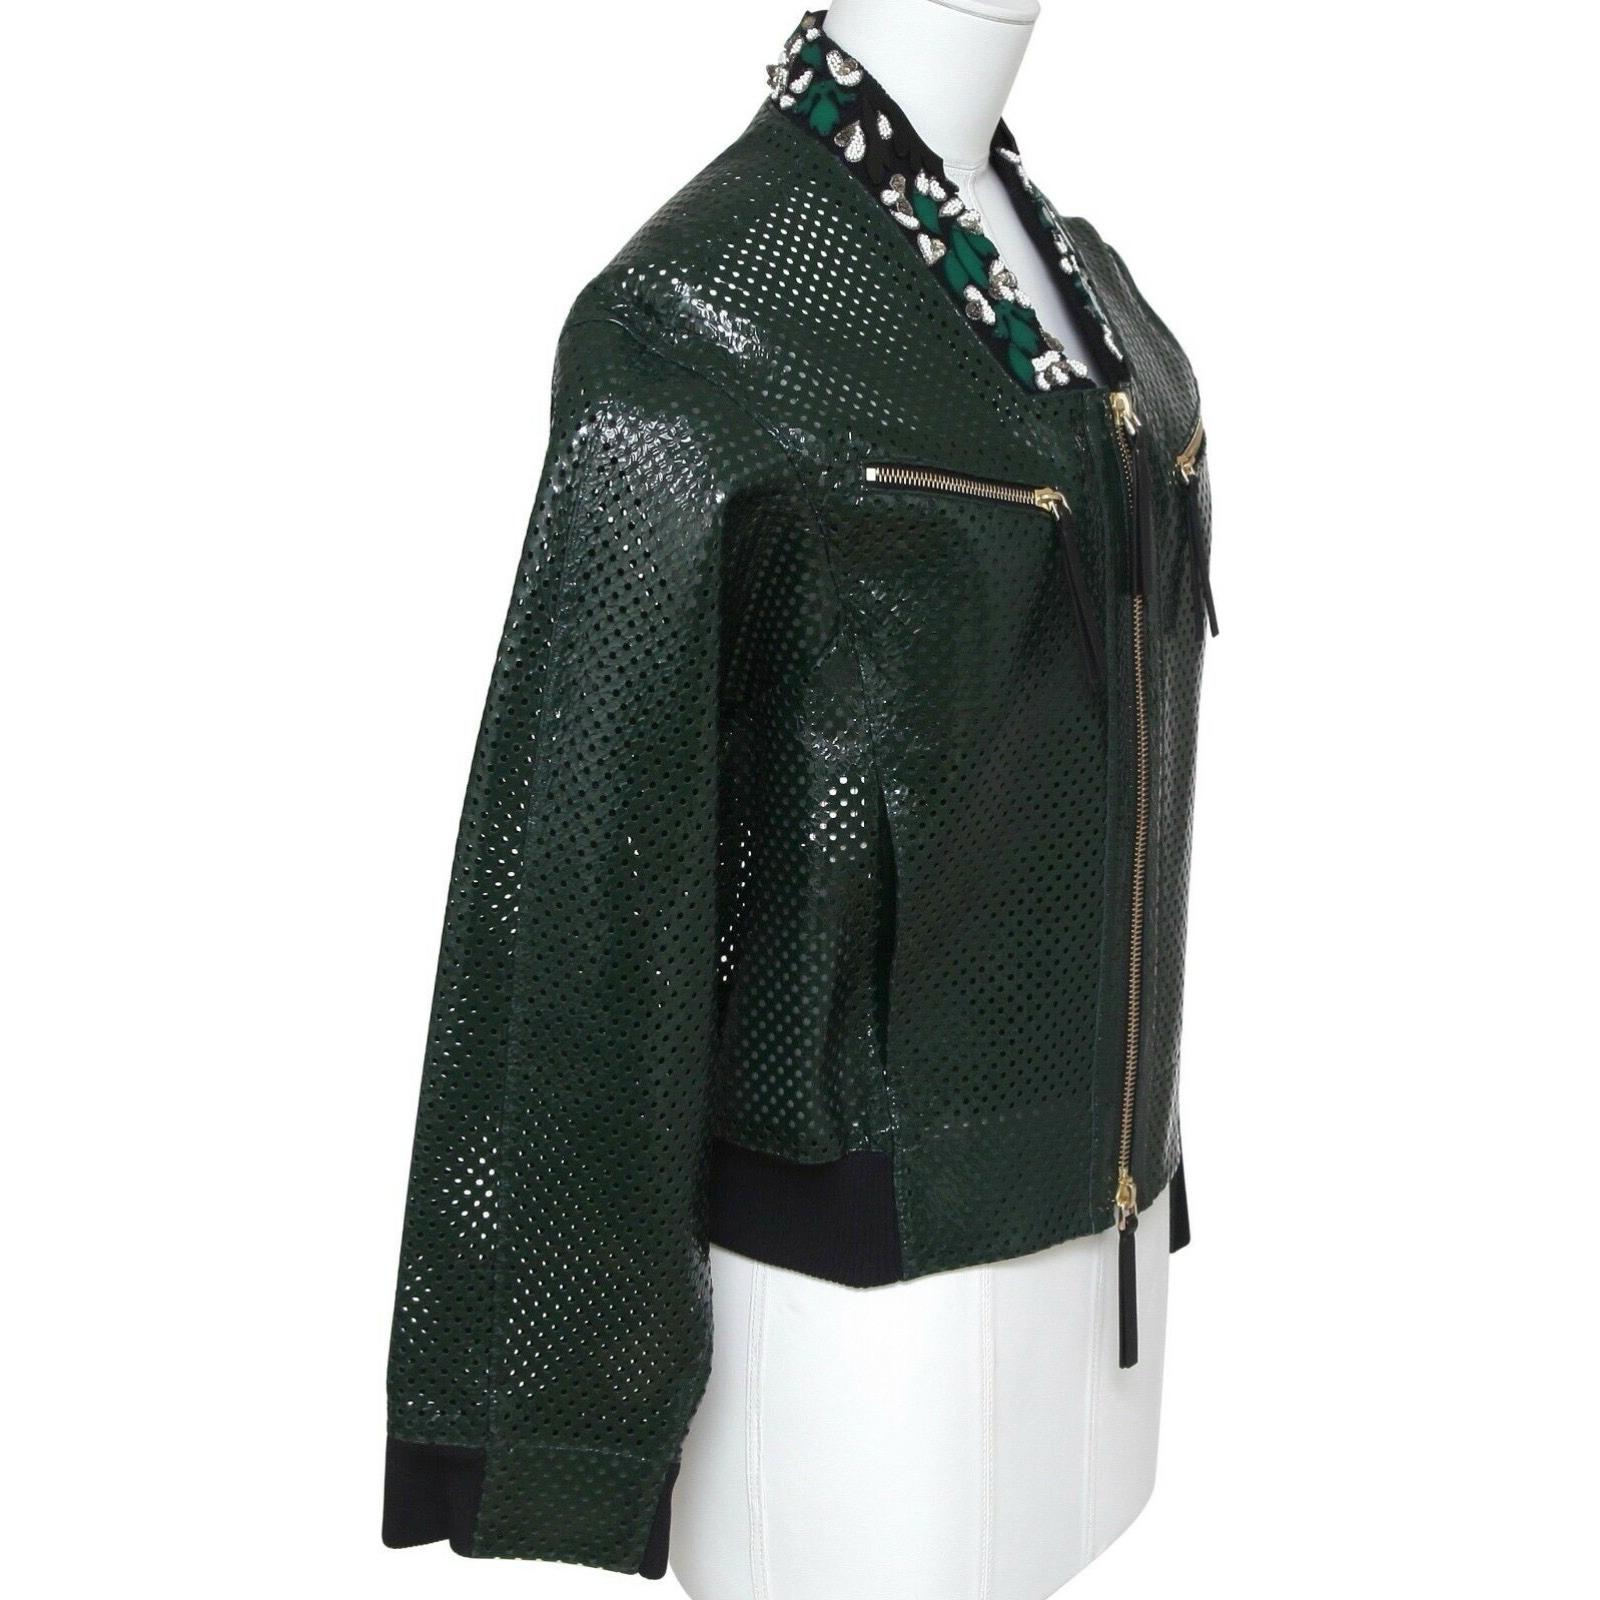 GUARANTEED AUTHENTIC MARNI PERFORATED LEATHER BOMBER JACKET WITH FLORAL EMBELLISHED ACCENT

Retail excluding sales taxes $3,370

Design:
 • Classic bomber style perforated leather jacket in a rich emerald green color.
 • Floral glass beads and